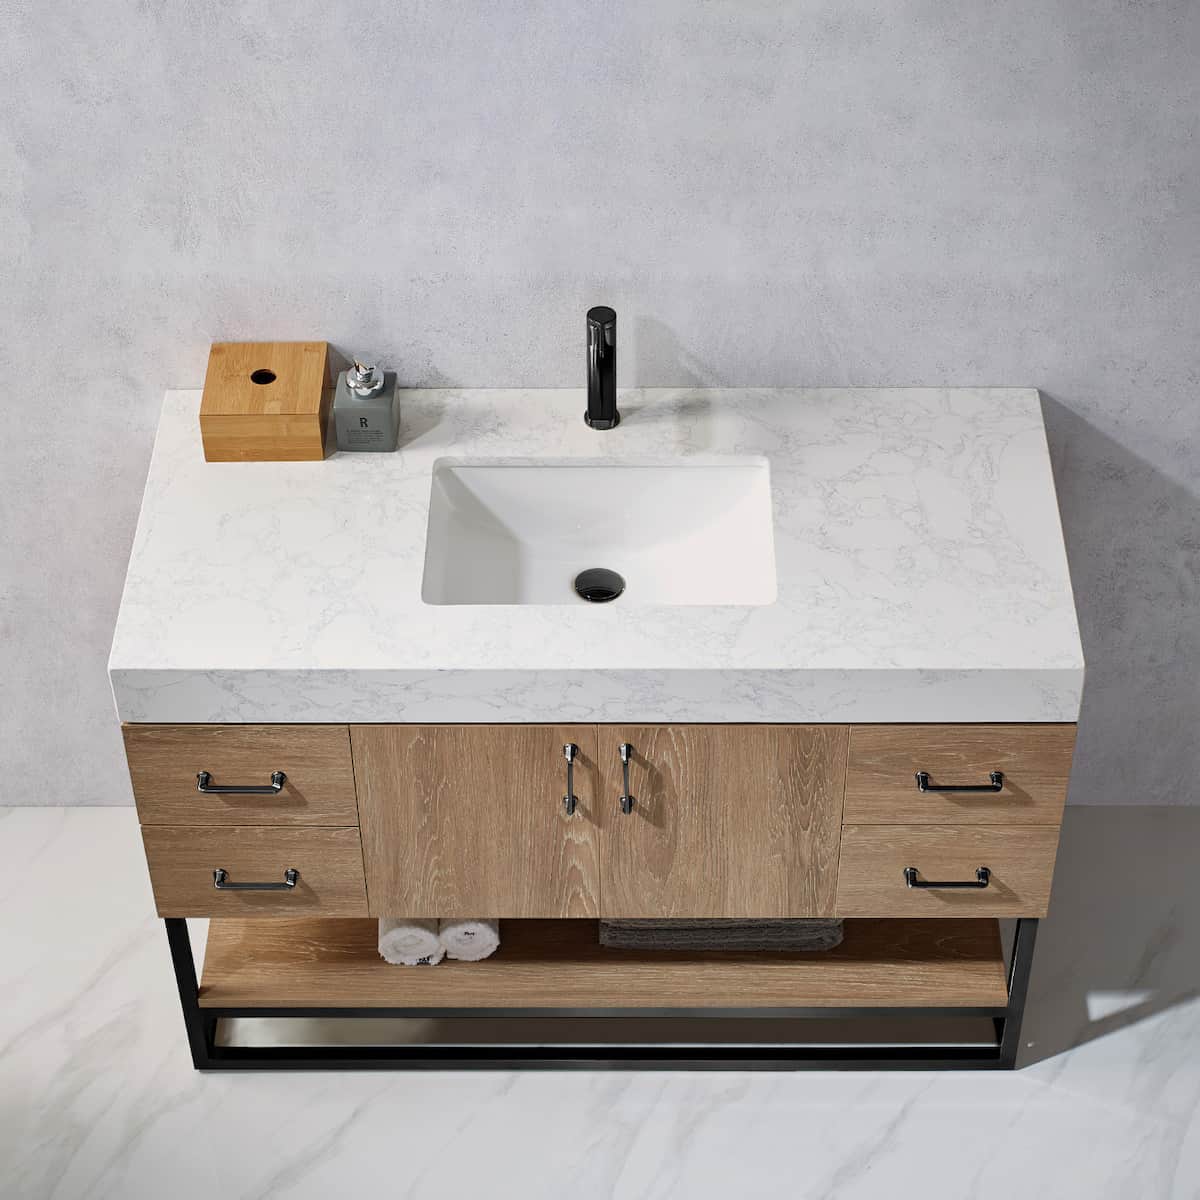 Vinnova Alistair 48 Inch Freestanding Single Vanity in North American Oak and Matte Black Frame with White Grain Stone Countertop Without Mirror Sink 789048B-NO-GW-NM